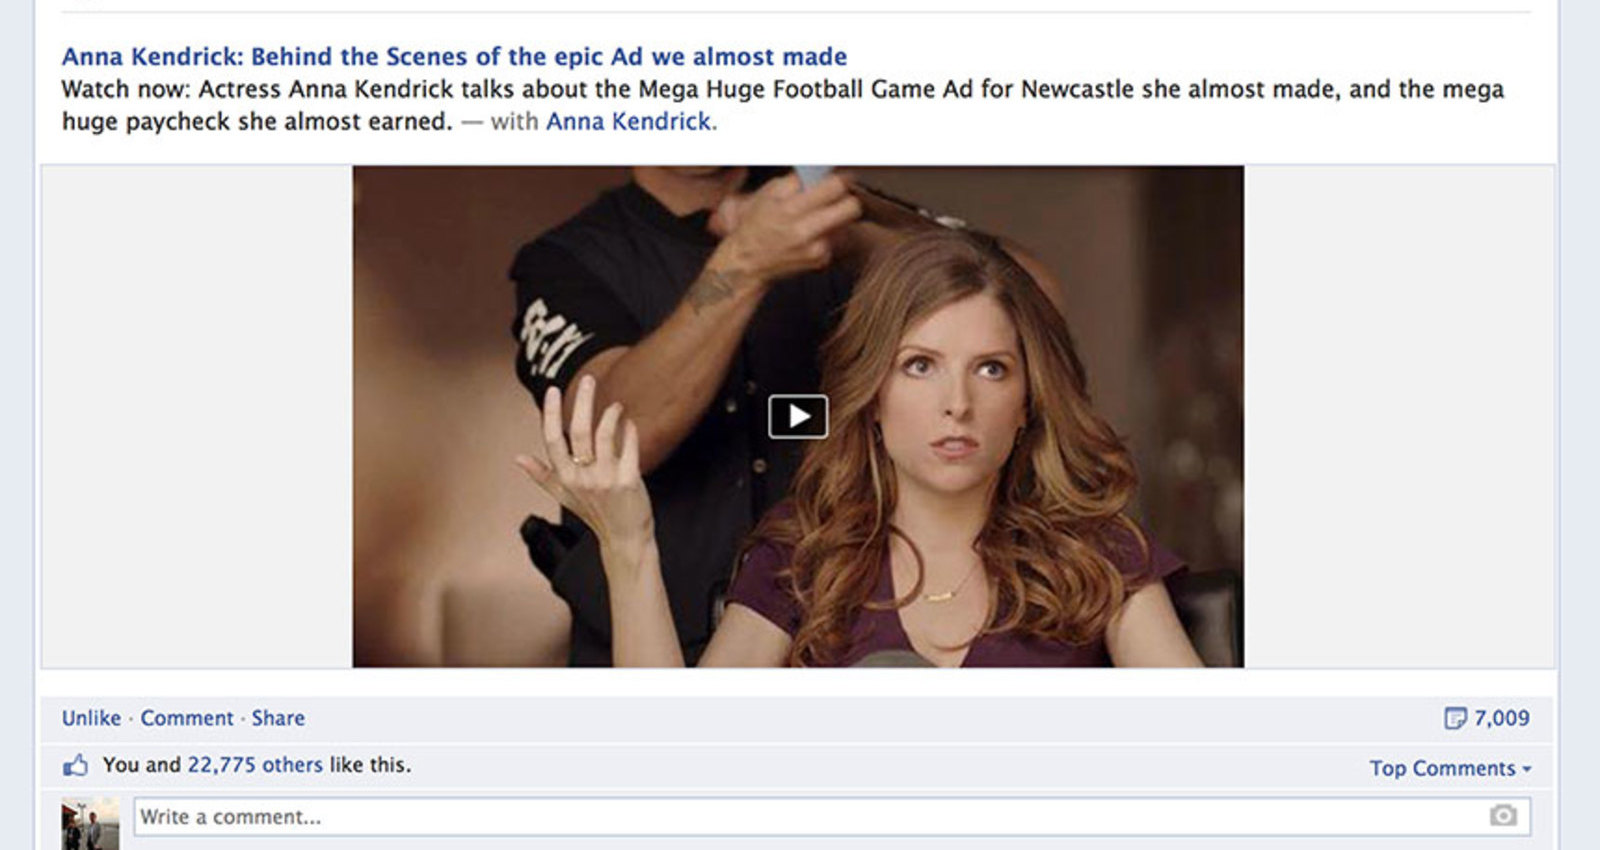 If We Made It - Anna Kendrick: Behind the Scenes of the Mega Huge Footbal Ad We Almost Made